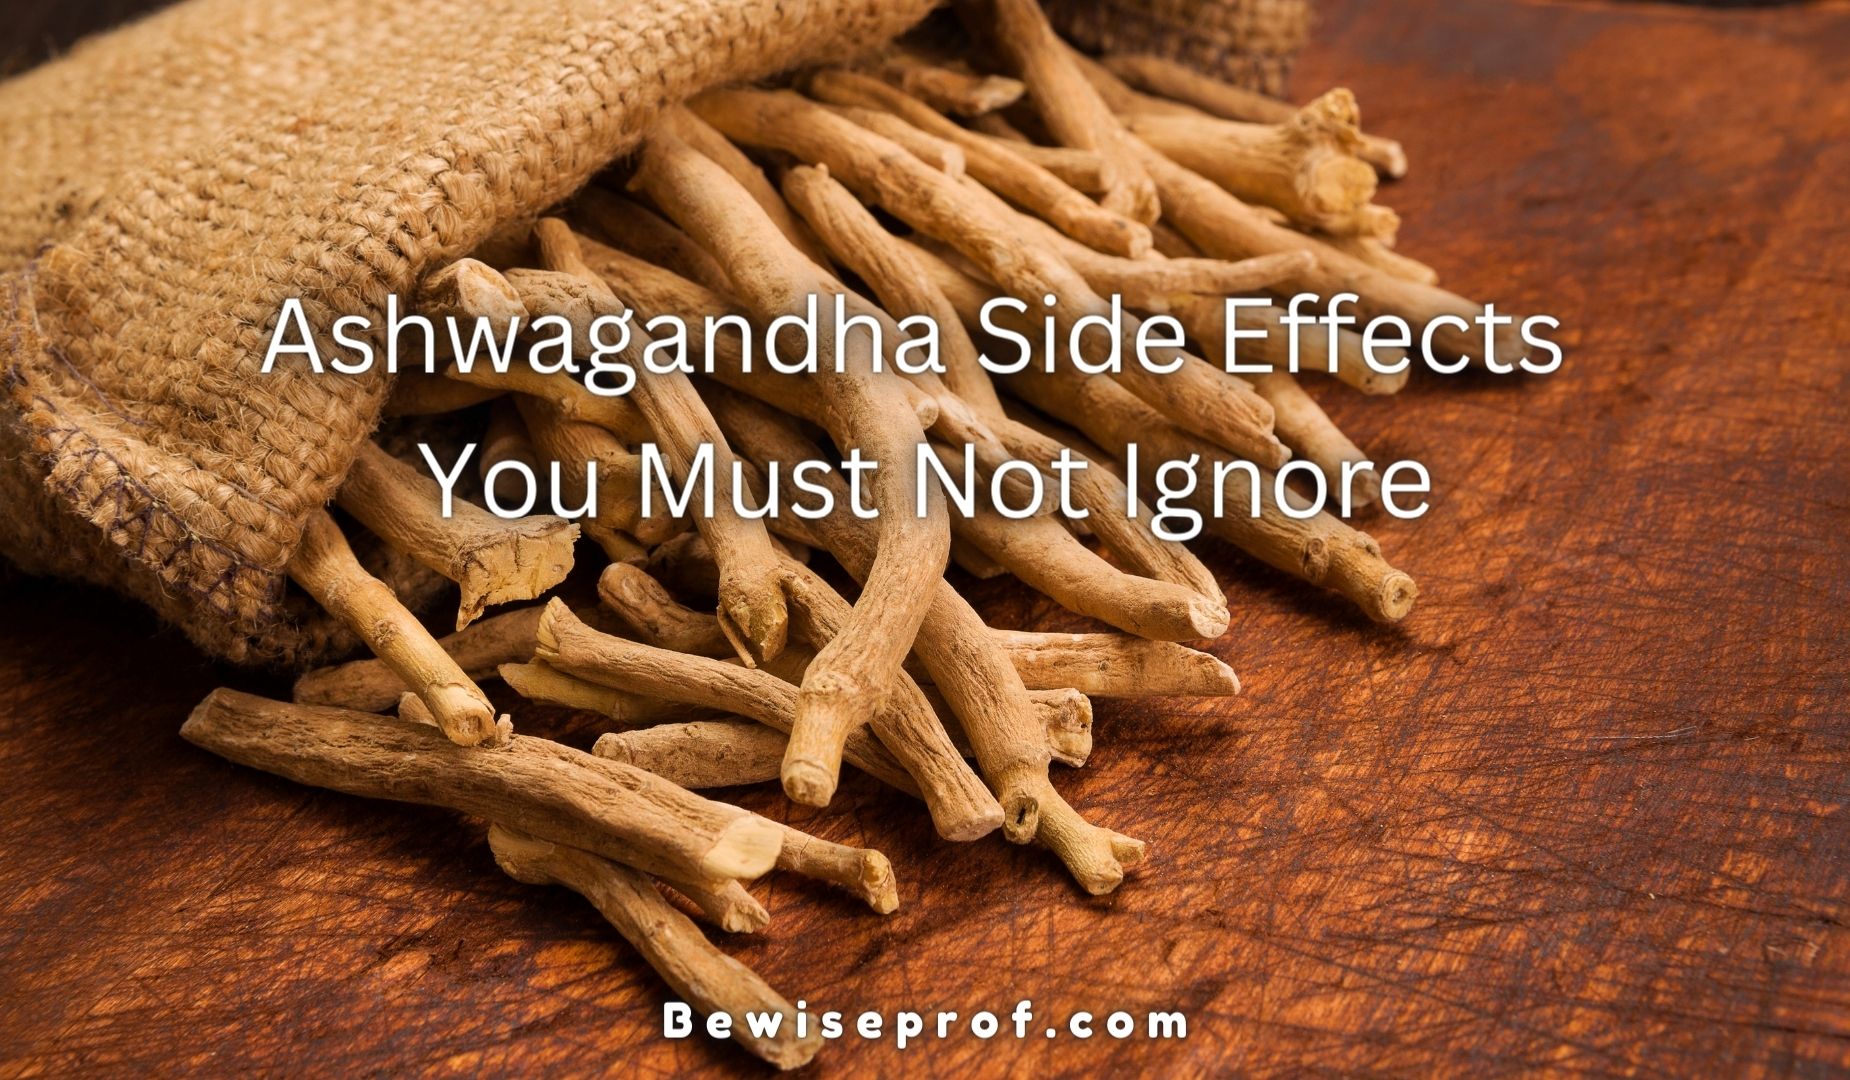 Ashwagandha Side Effects You Must Not Ignore